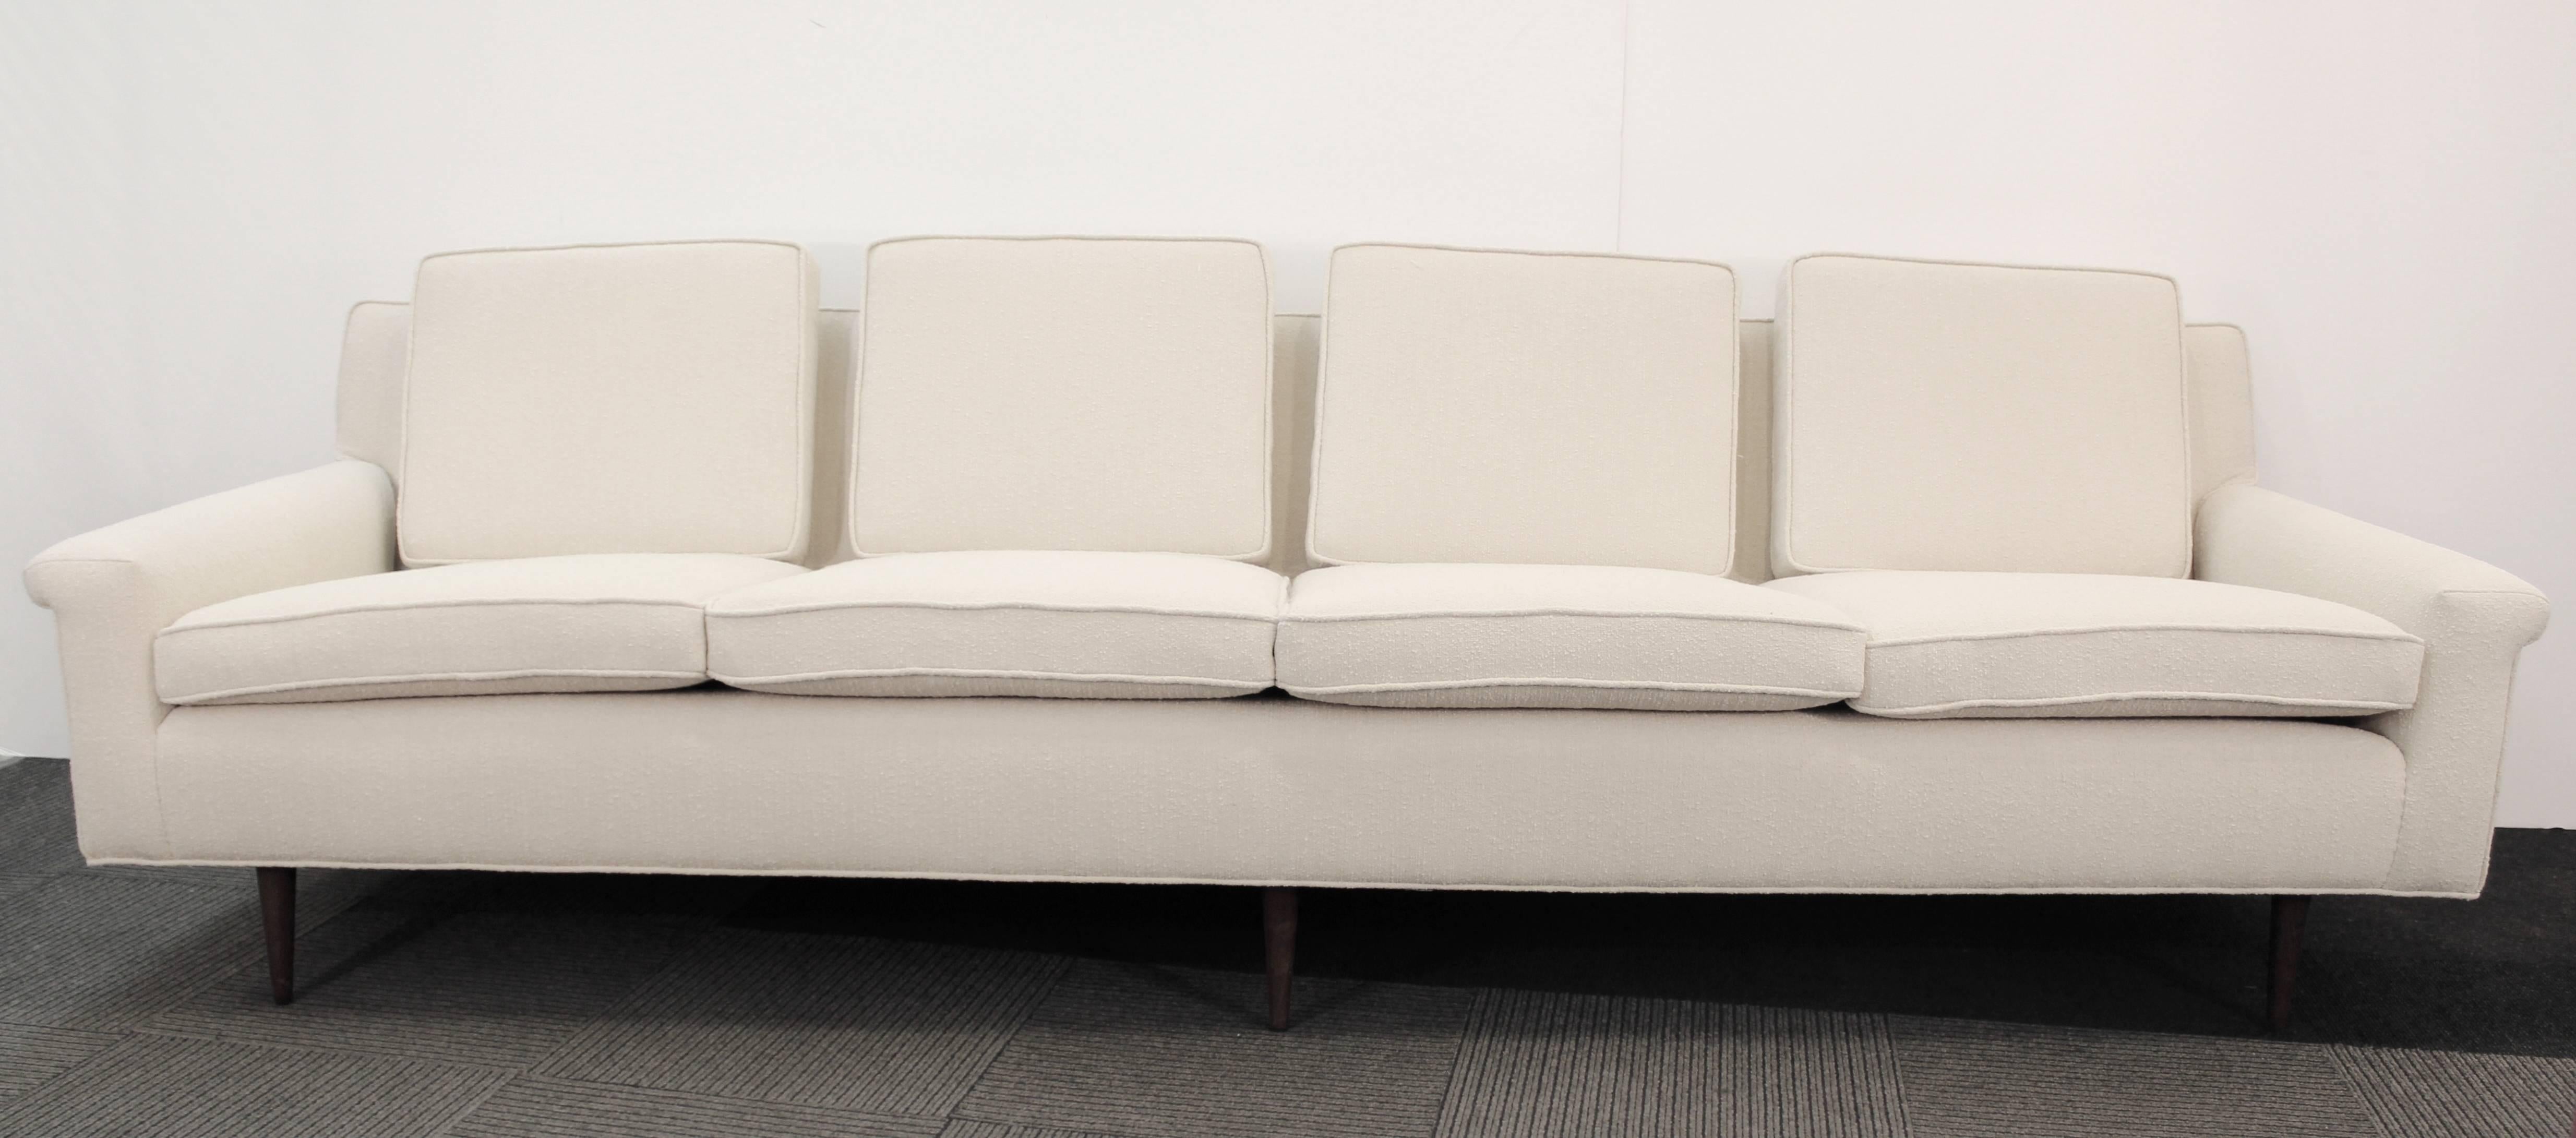 A four-seat sofa manufactured, circa 1960s by Thayer Coggin, upholstered in off-white bouclé fabric, raised on tapered walnut legs. Markings include original label. Excellent vintage condition, newly reupholstered.

110066